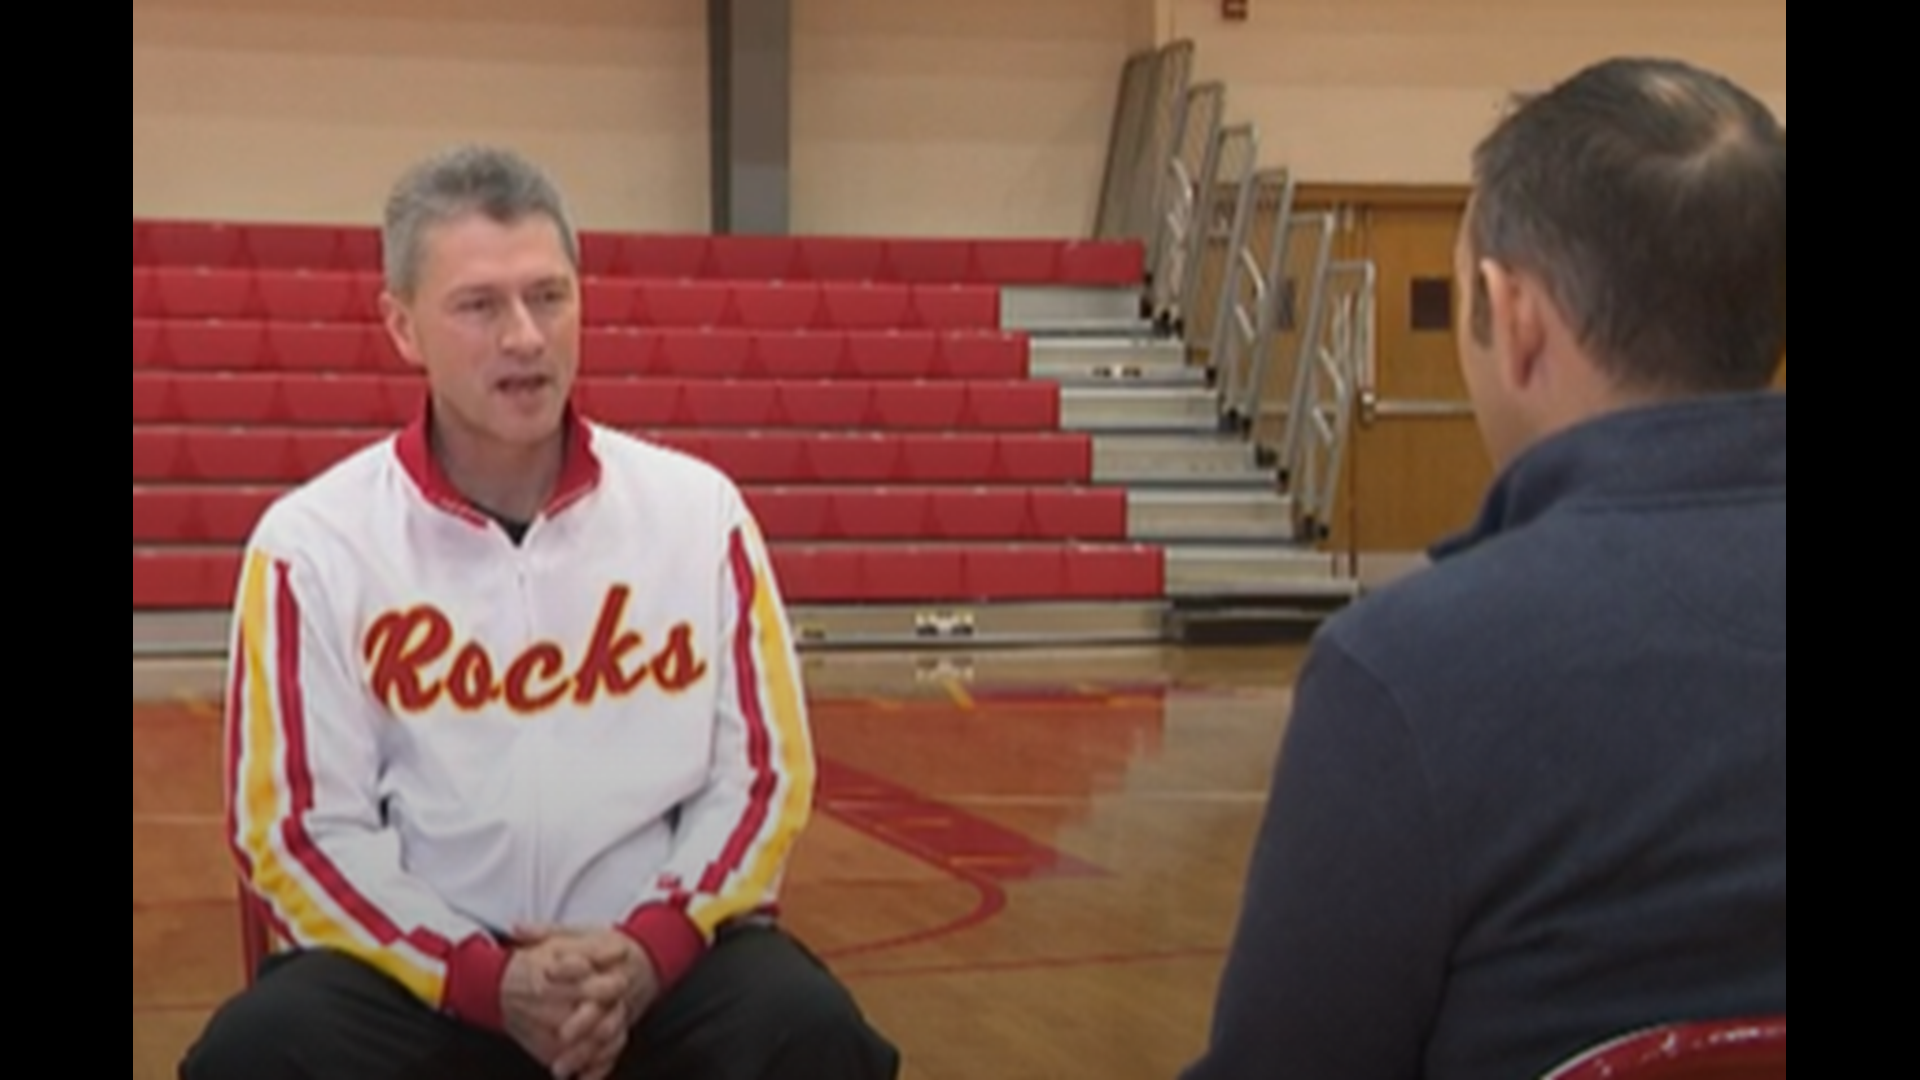 Rock Island Basketball Coach Thom Sigel is retiring in 2021 after 20 successful seasons including the high school's only state title in 2011.